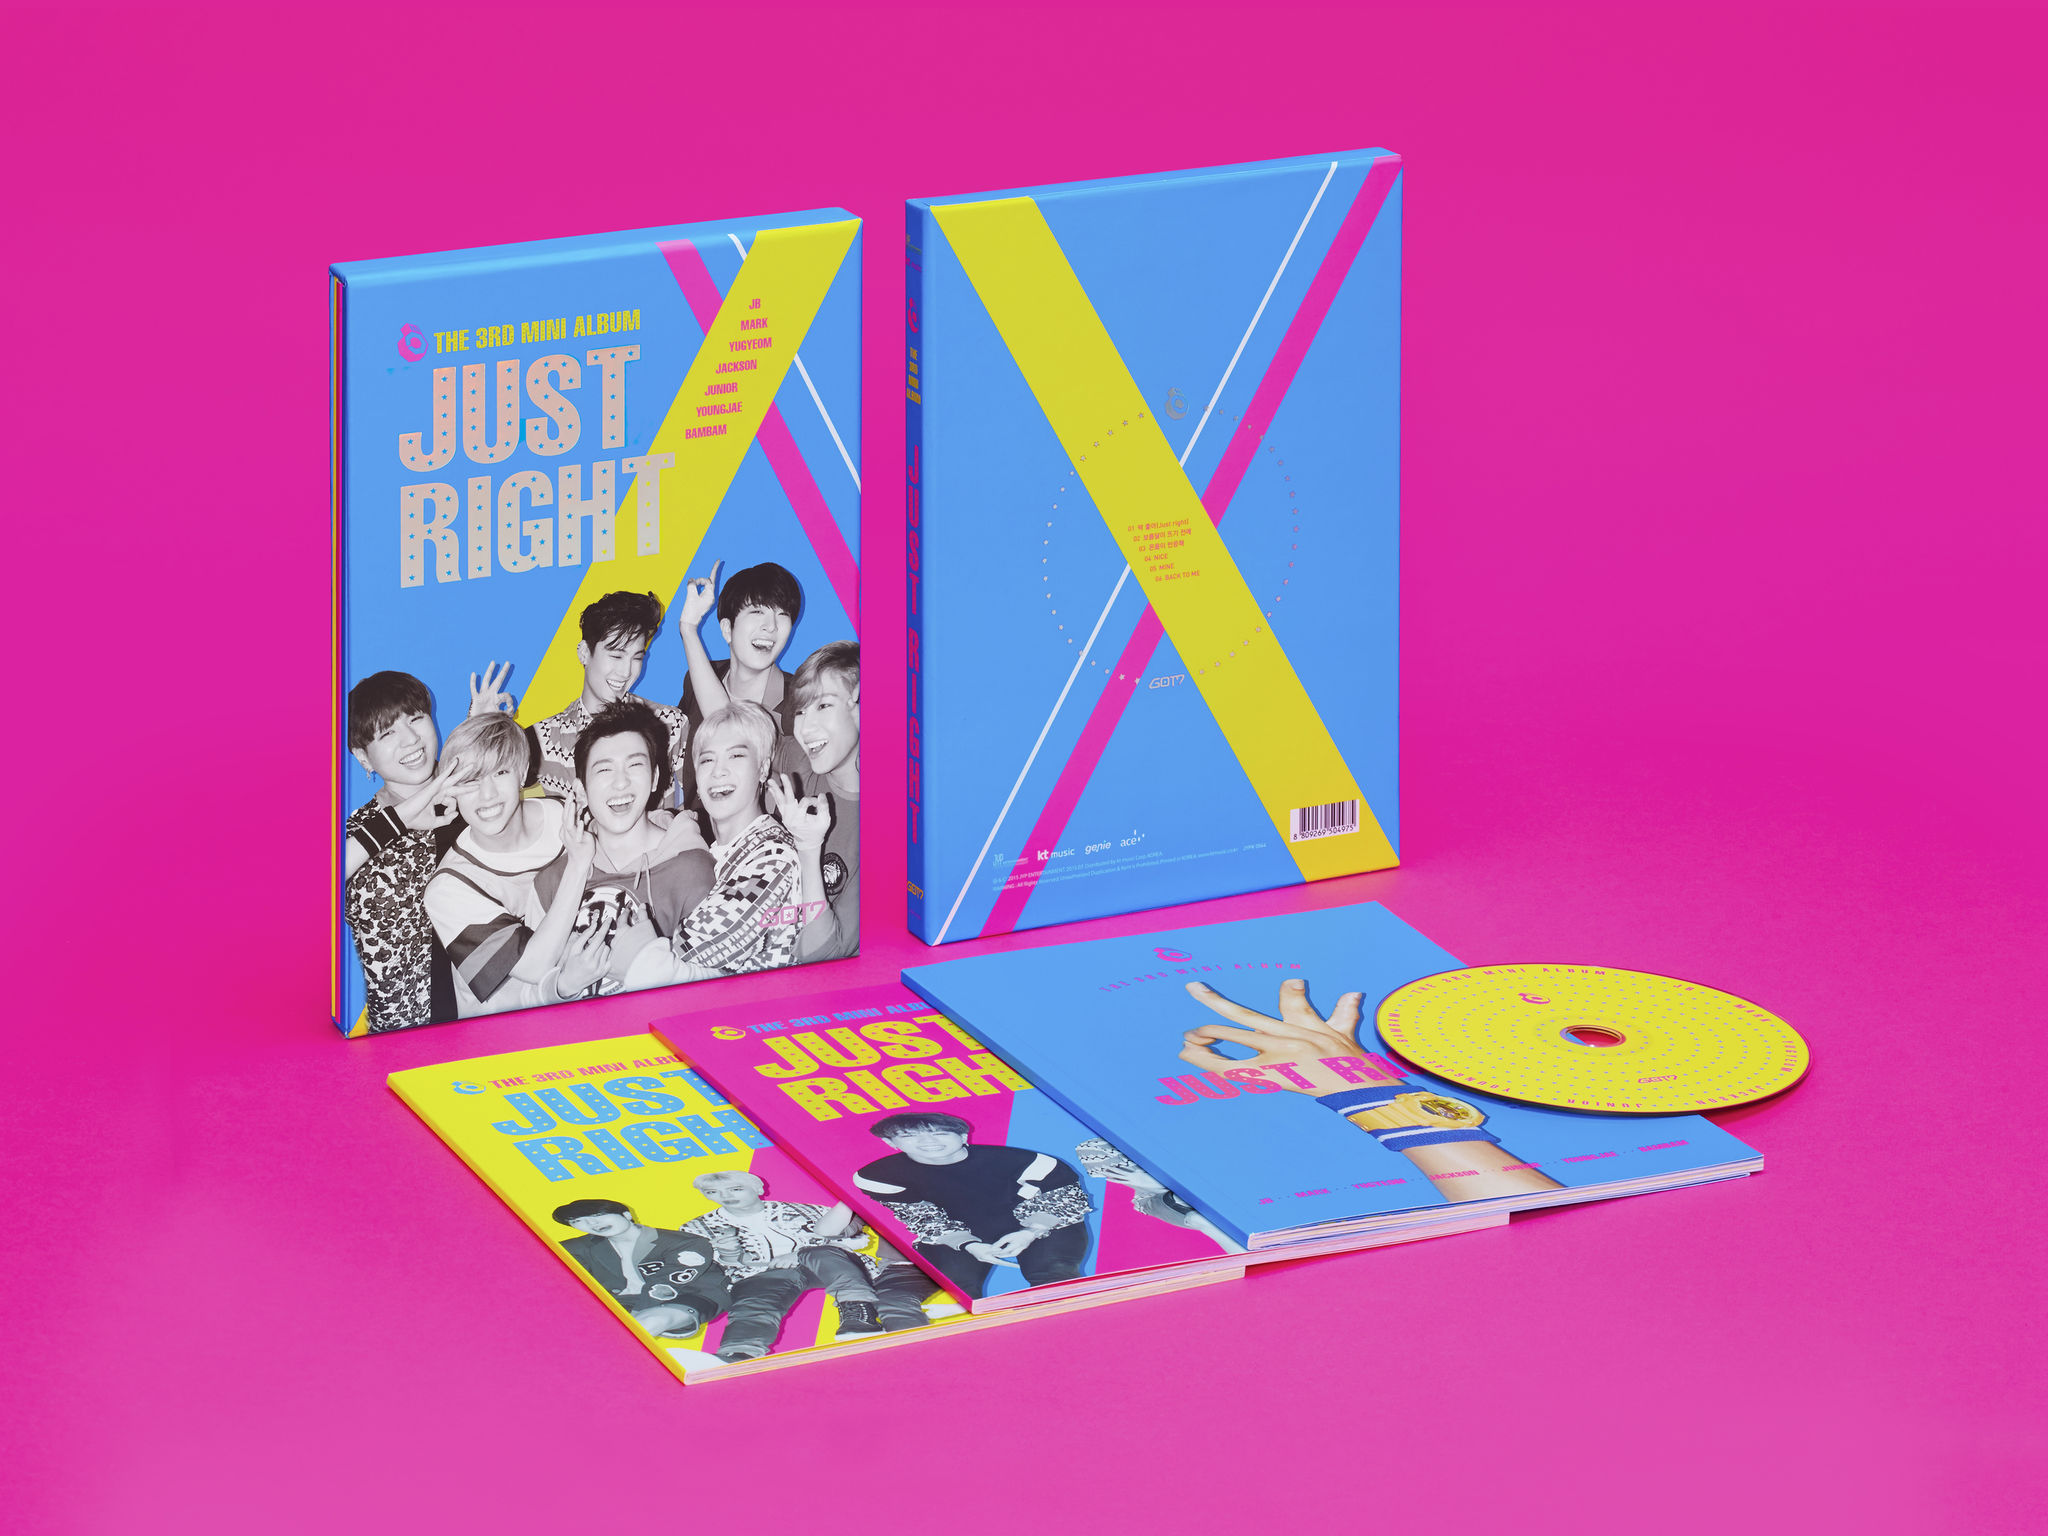 GOT7 "Just right"